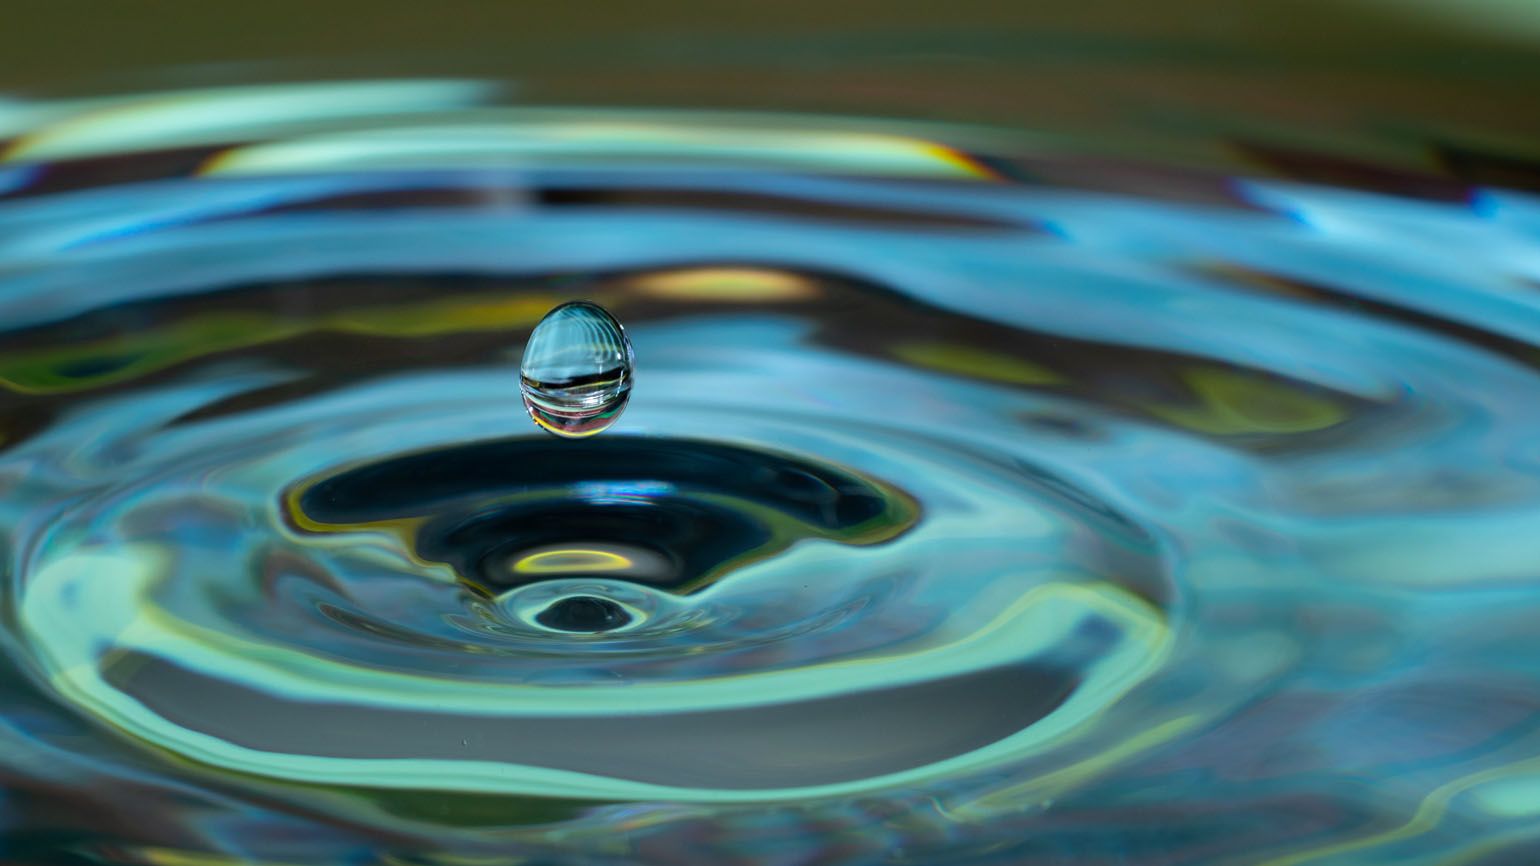 A single water droplet causing ripples in water; Getty Images